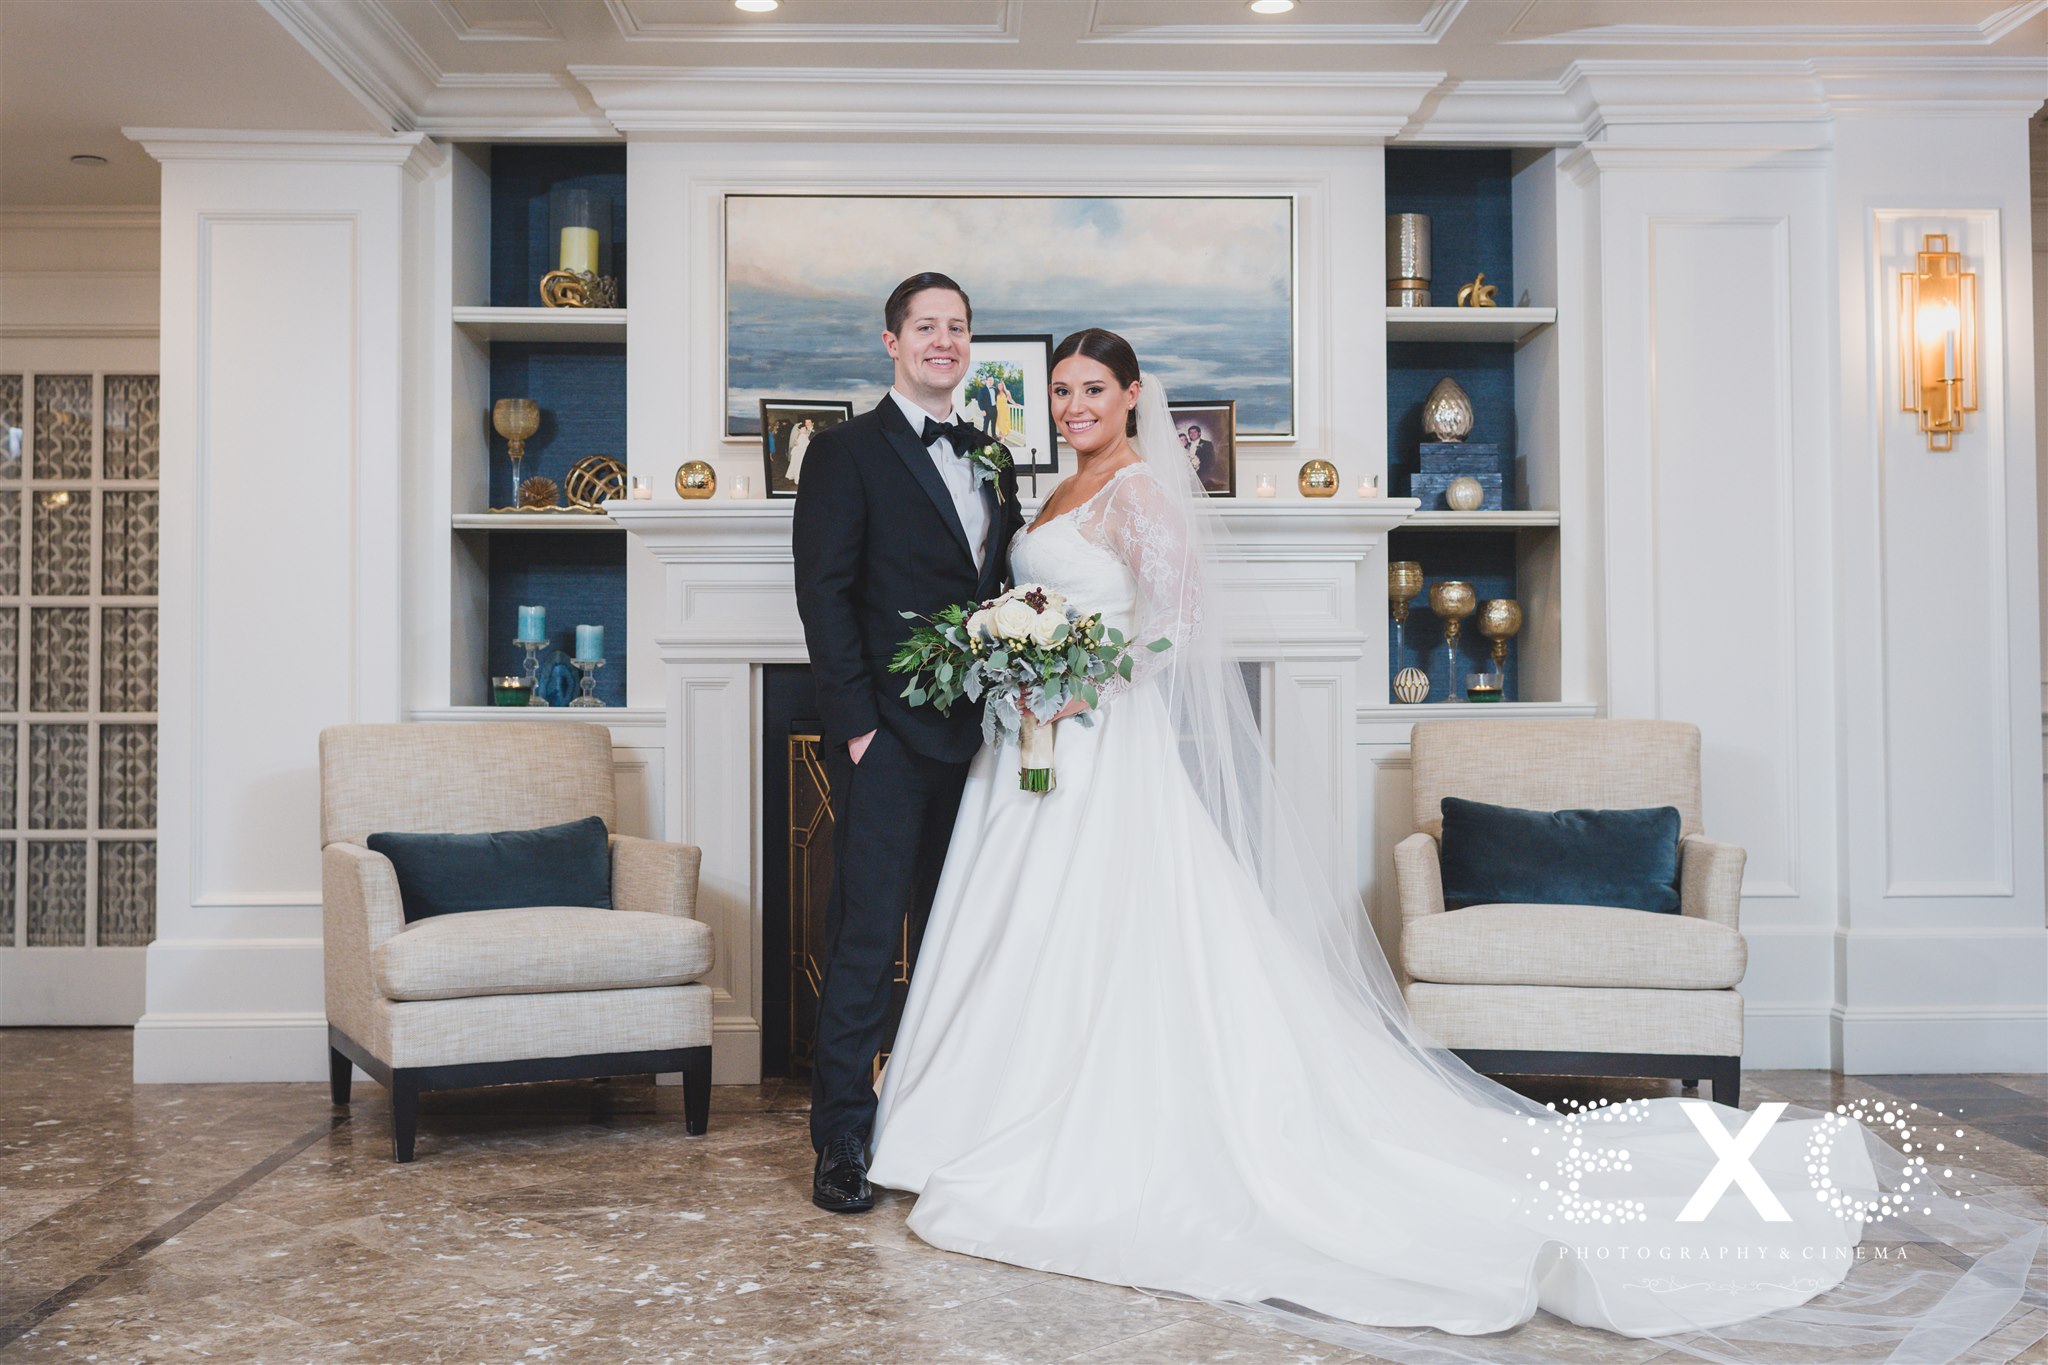 Bride and groom at Bridgeview Yacht Club